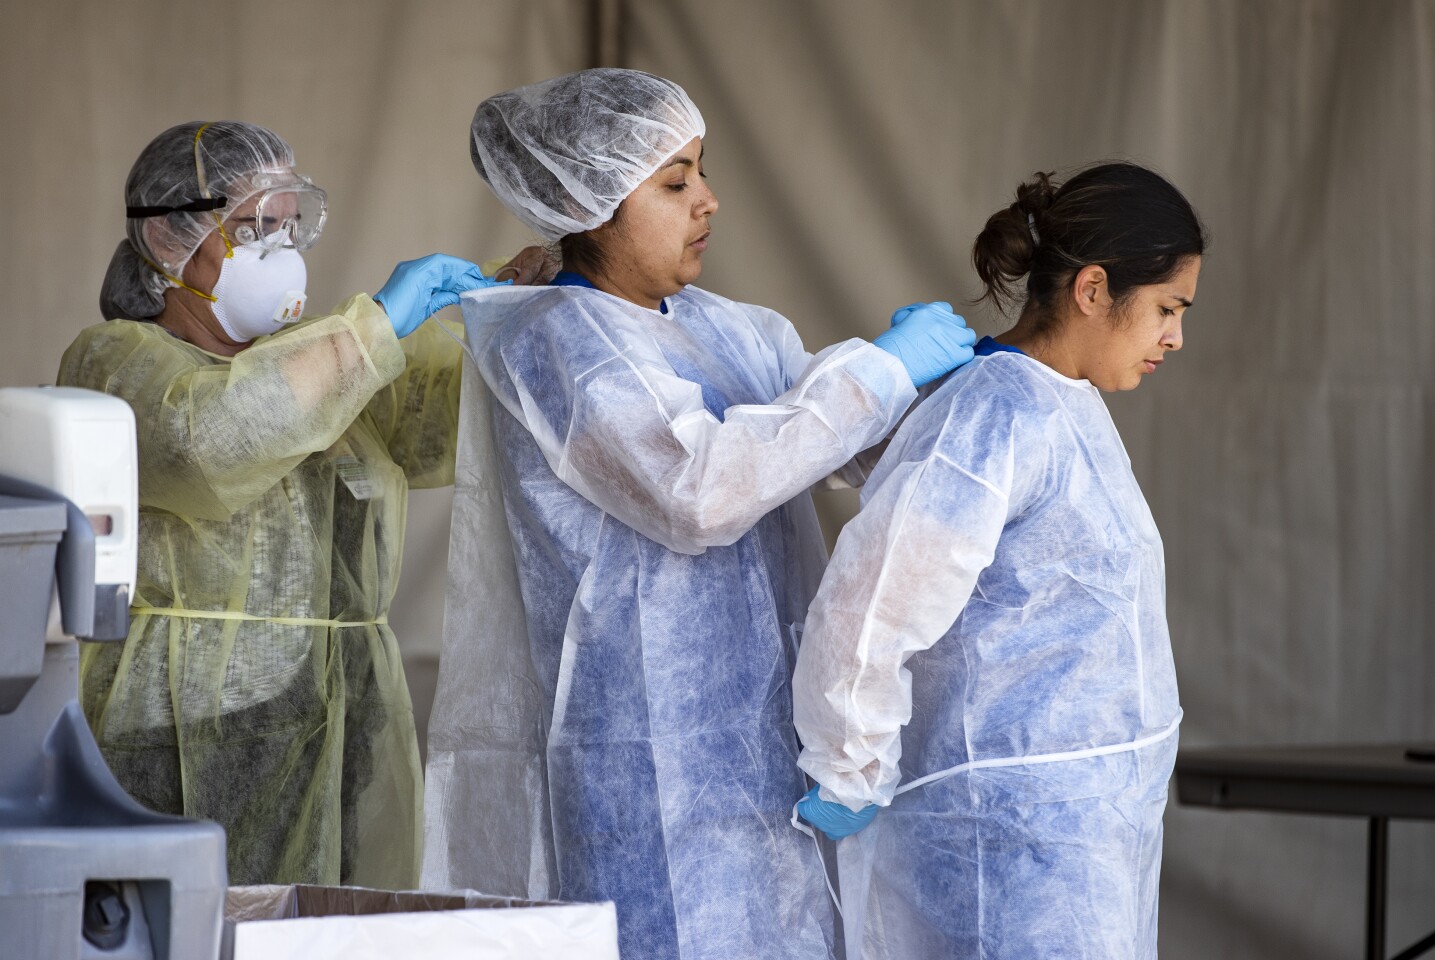 INDIAN WELLS, CA - MARCH 24, 2020: Riverside County medical personnel help each other with their PPE's at a drive-though coronavirus testing facility for Coachella Valley residents in the parking lot of Southwest church on March 24, 2020 in Indian Wells, California. The testing facility is open Tuesday - Saturday.(Gina Ferazzi/Los AngelesTimes)